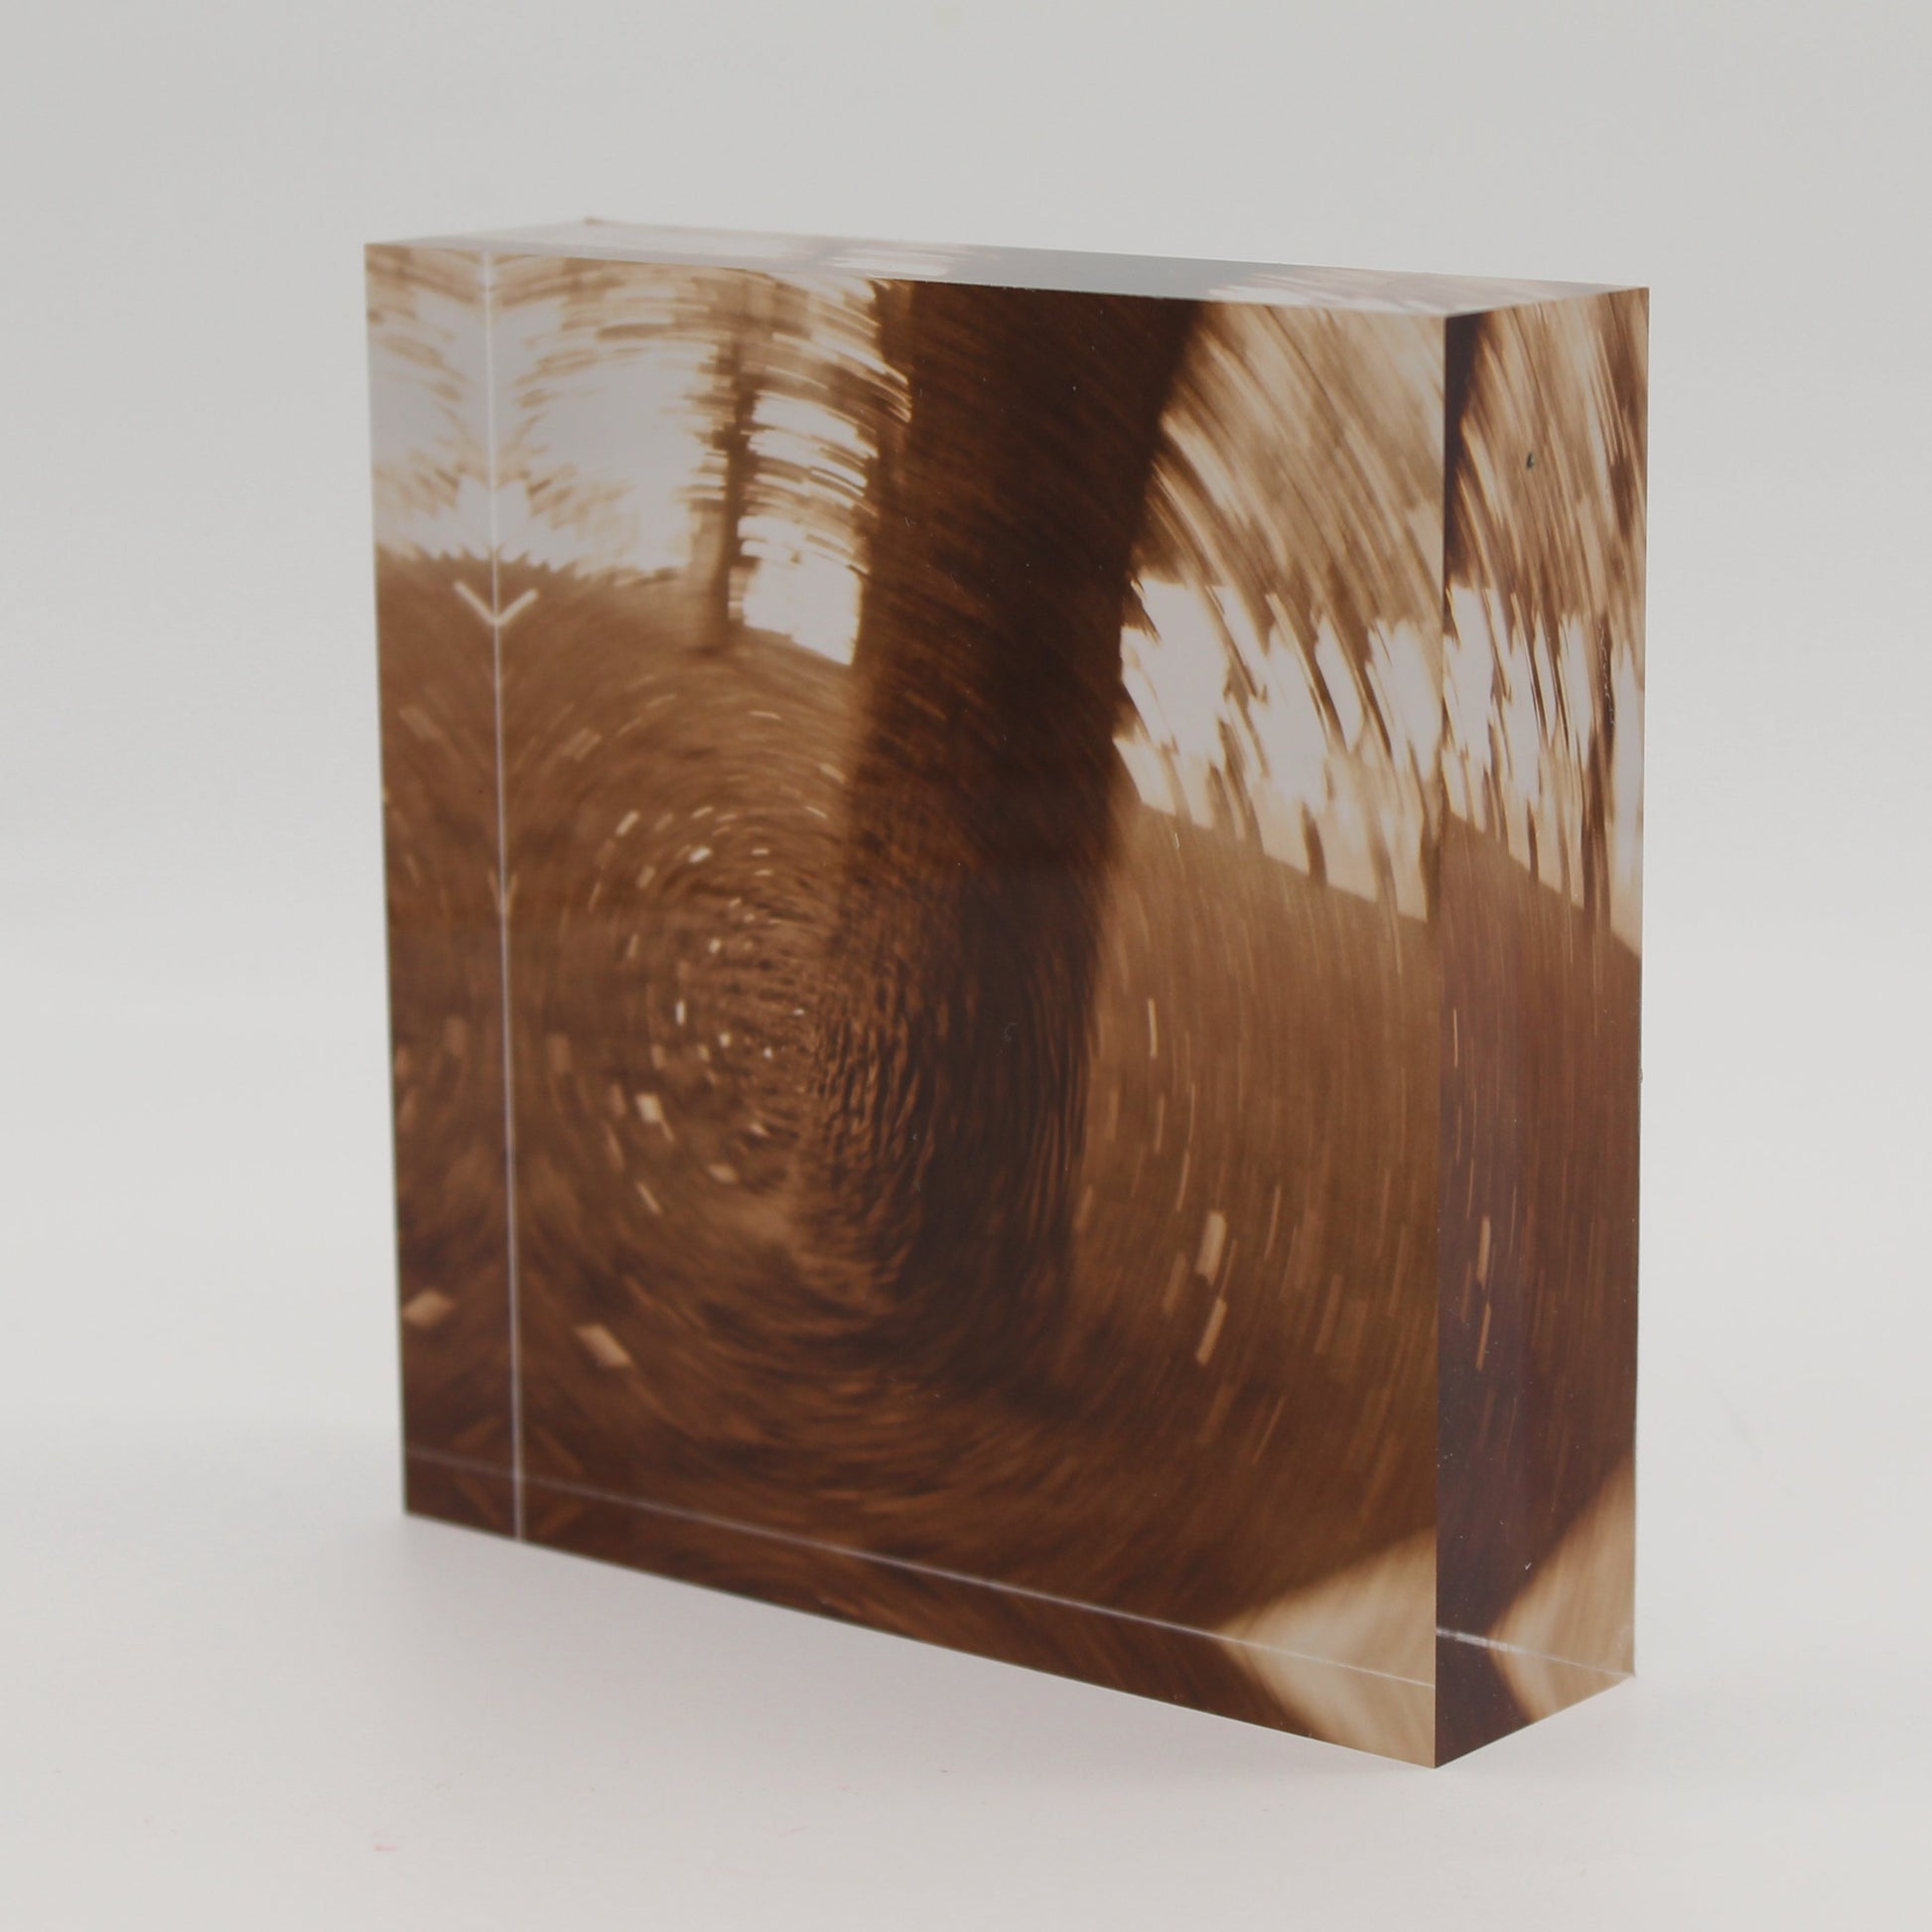 Tilted view of Acrylic block depicting tree trunk in motion